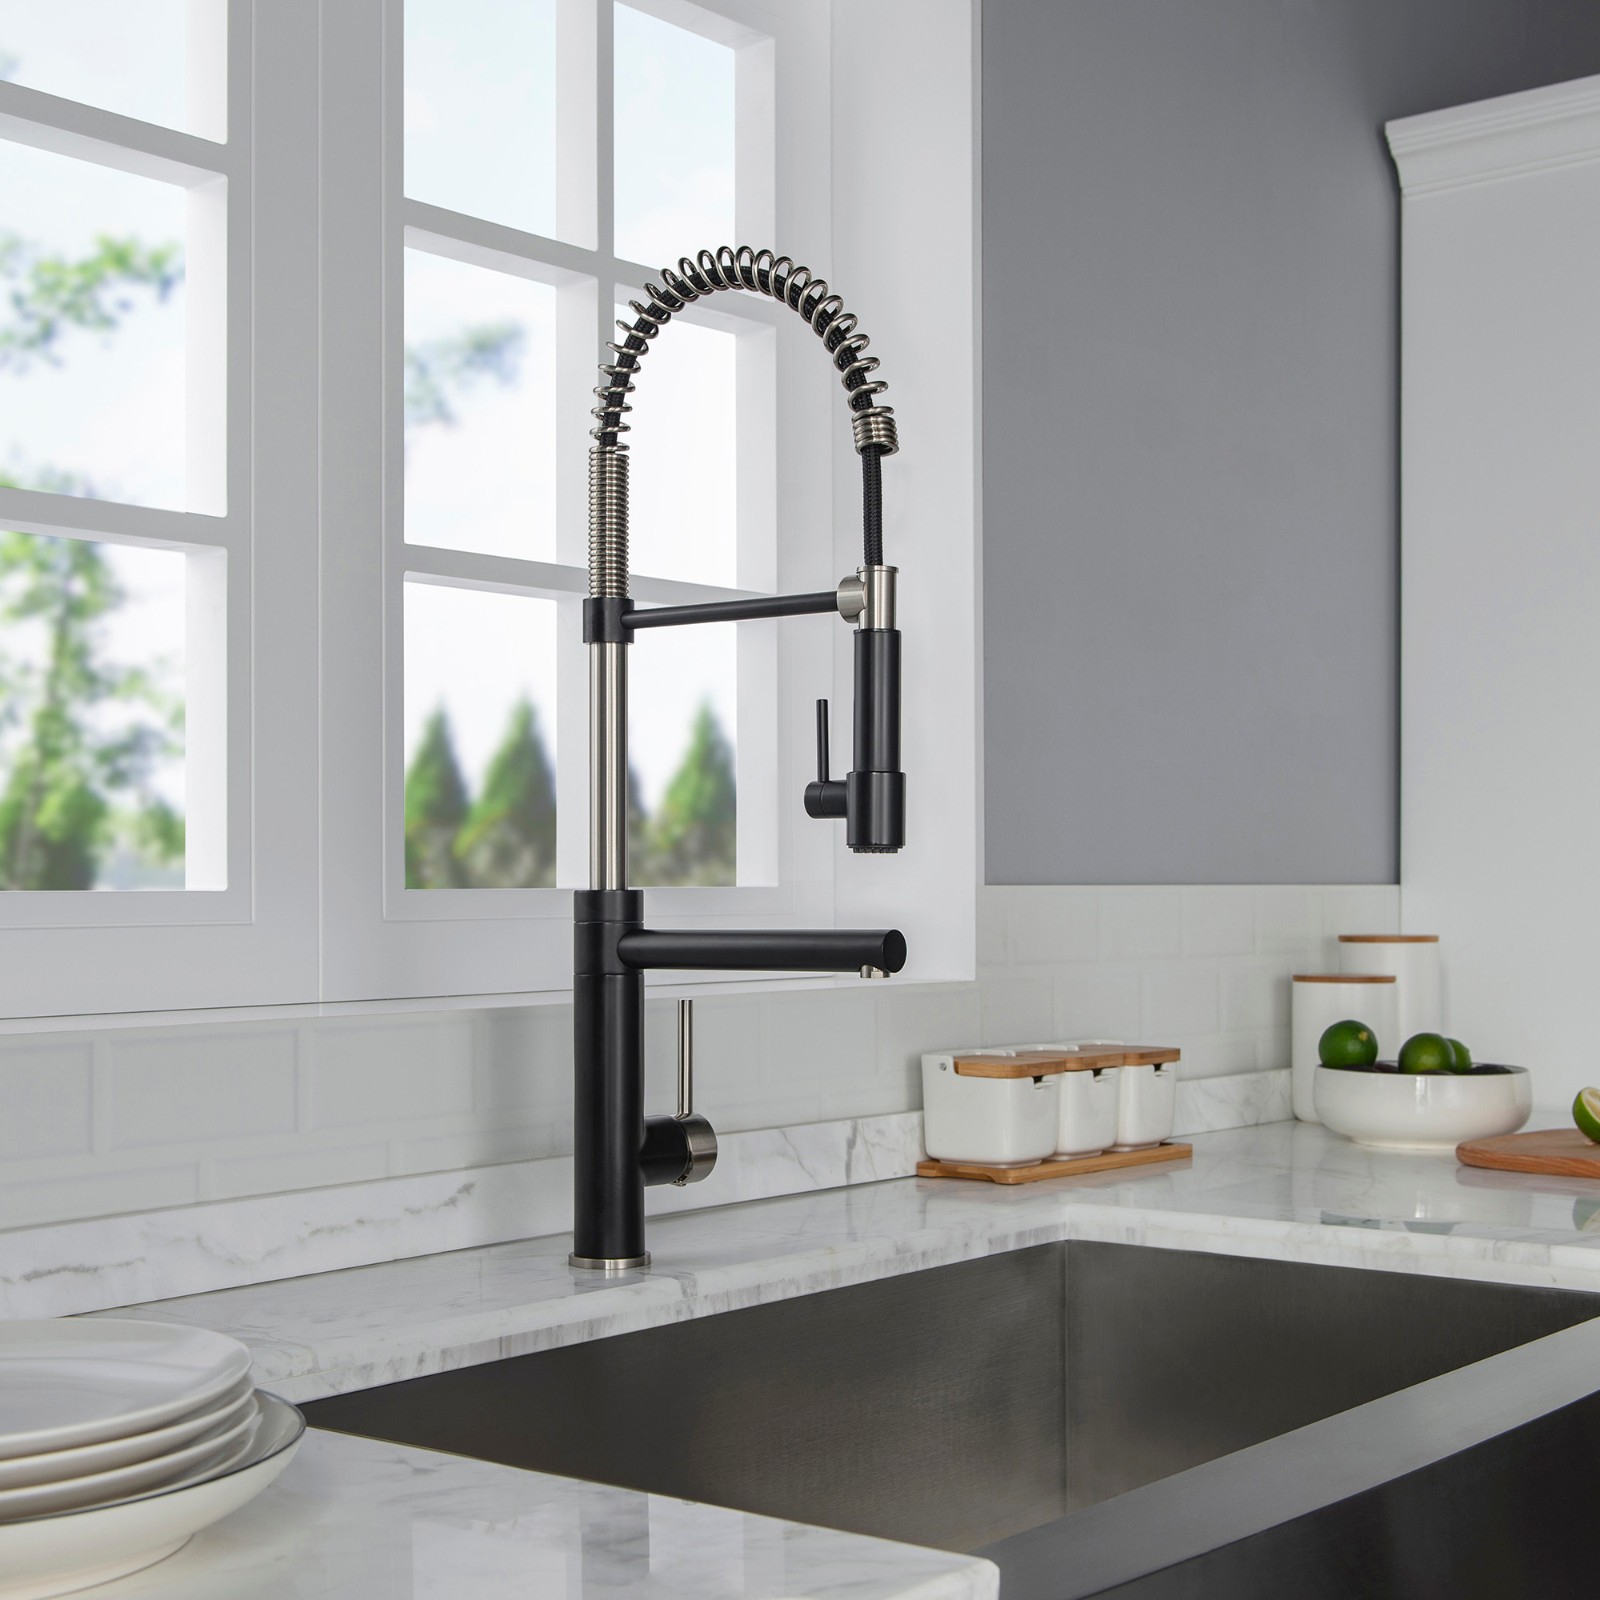  WOODBRIDGE WK060501BL Stainless Steel Single Handle Pre-Rinse Pull Down Kitchen Faucet and Pot Filler in Matte Black Finish._5038